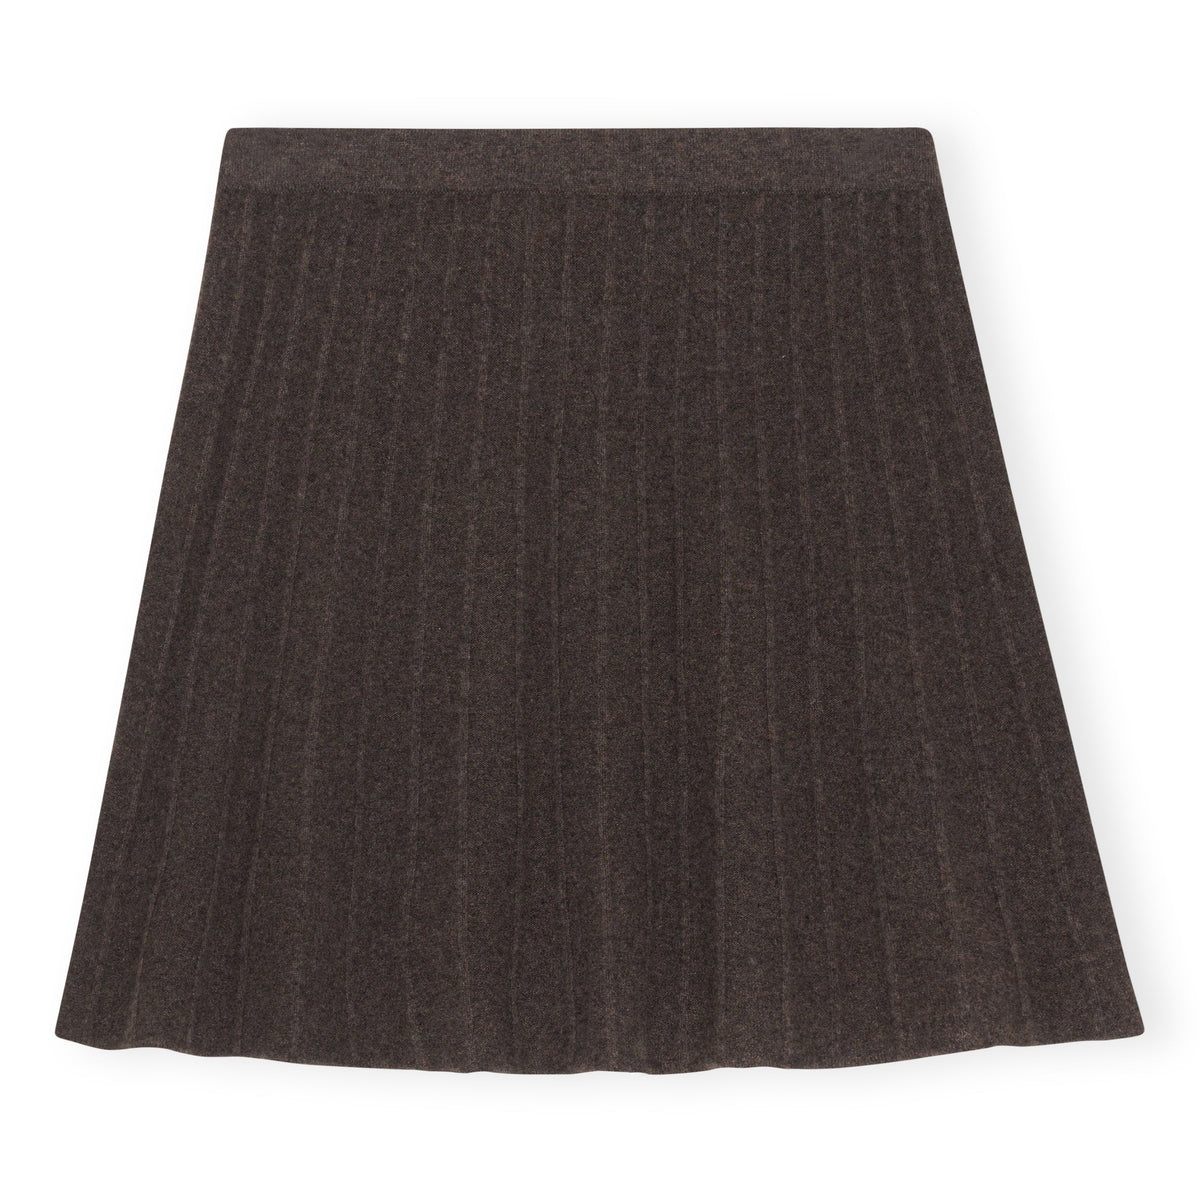 CARE BY ME 100% Cashmere Womens Ulrikka Skirt